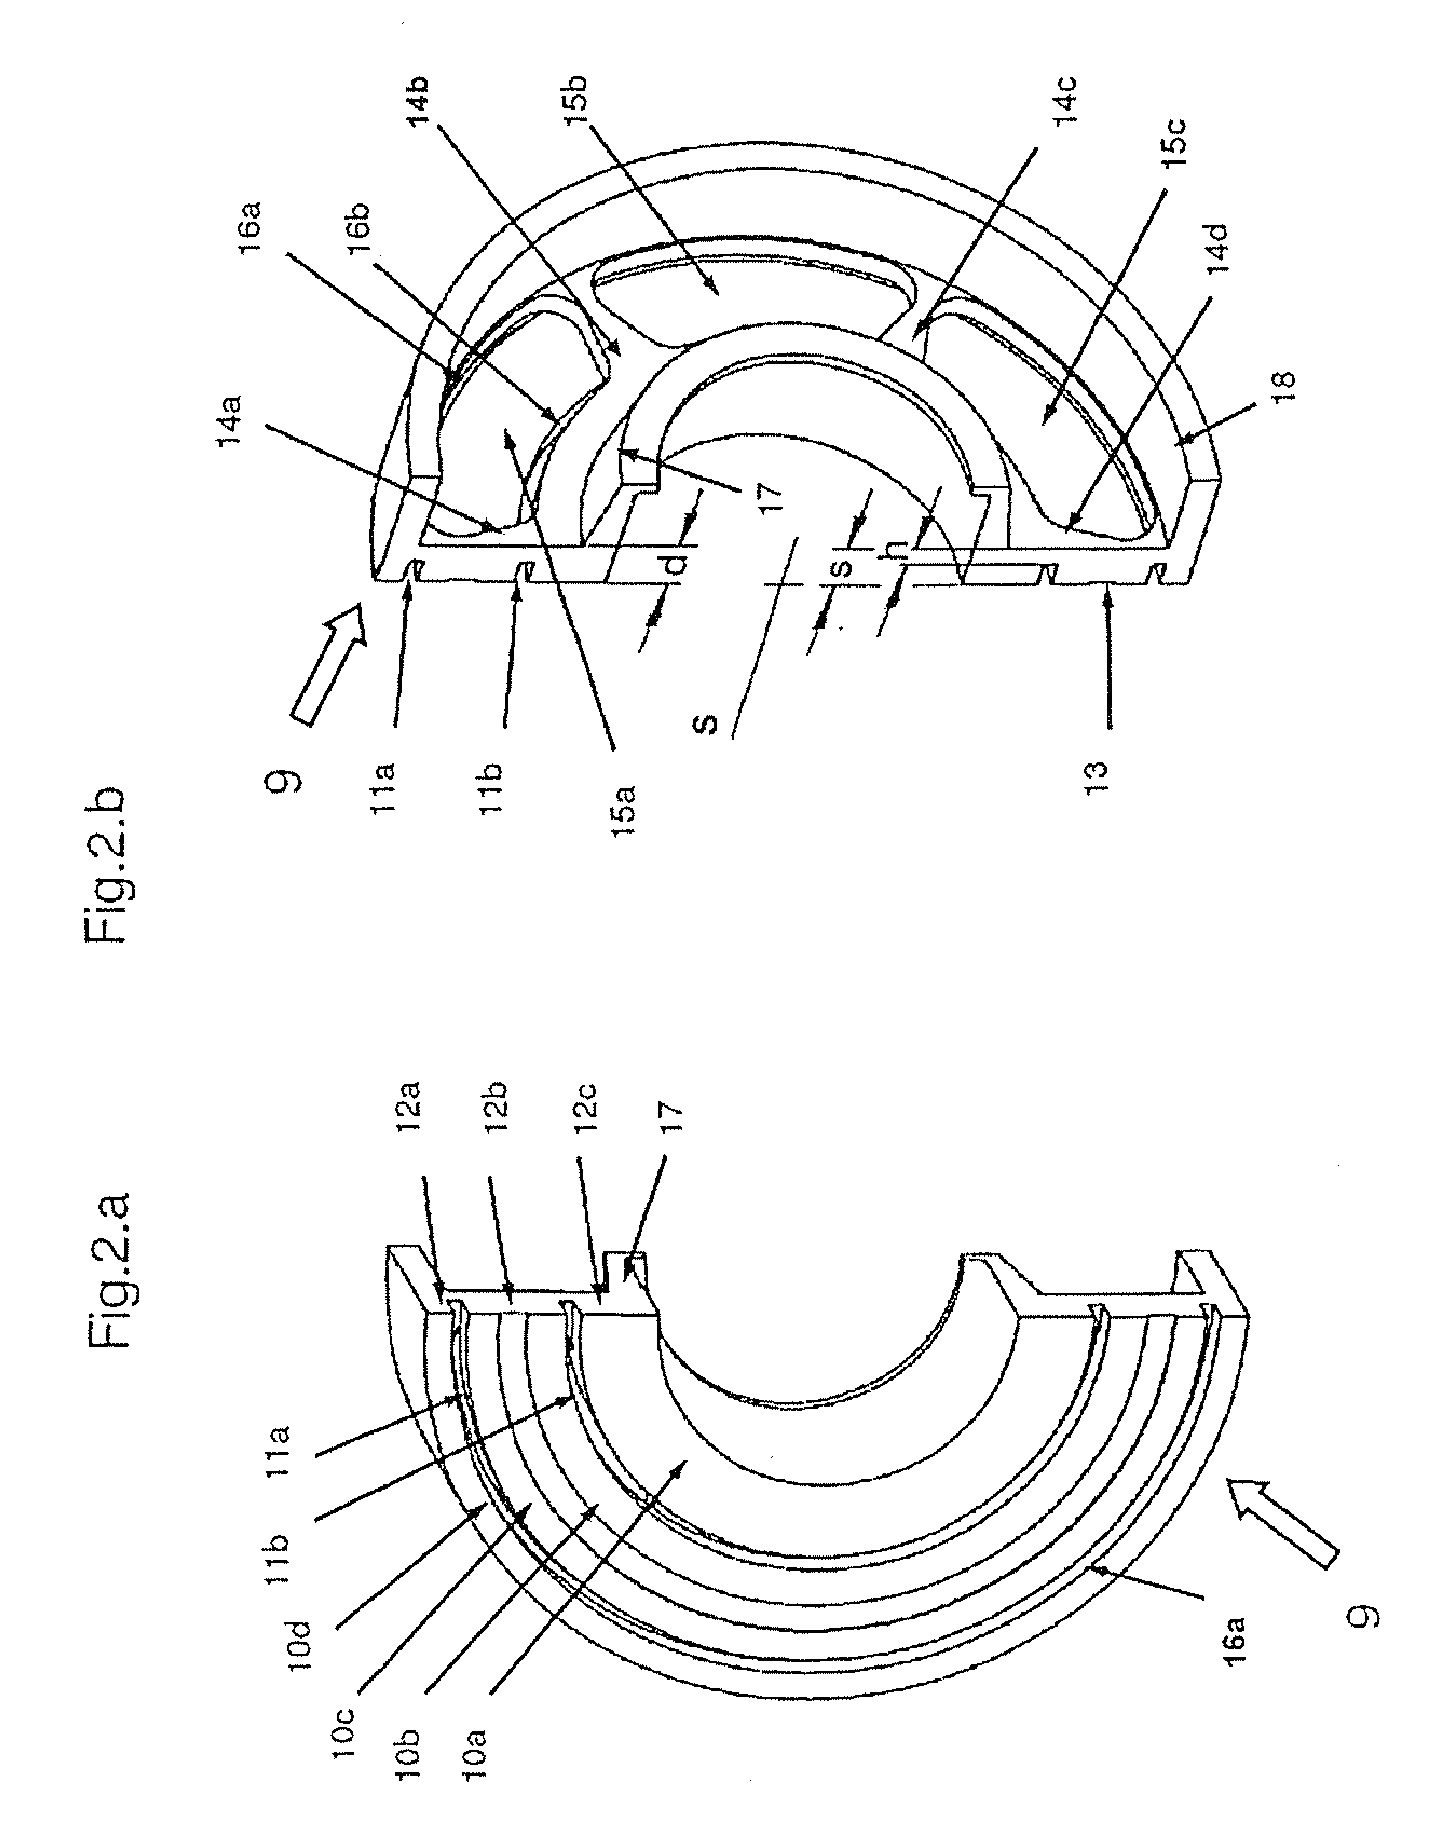 Method for producing clutch and brake disks for electromagnetic clutches or electromagnetic brakes having at least one friction surface element